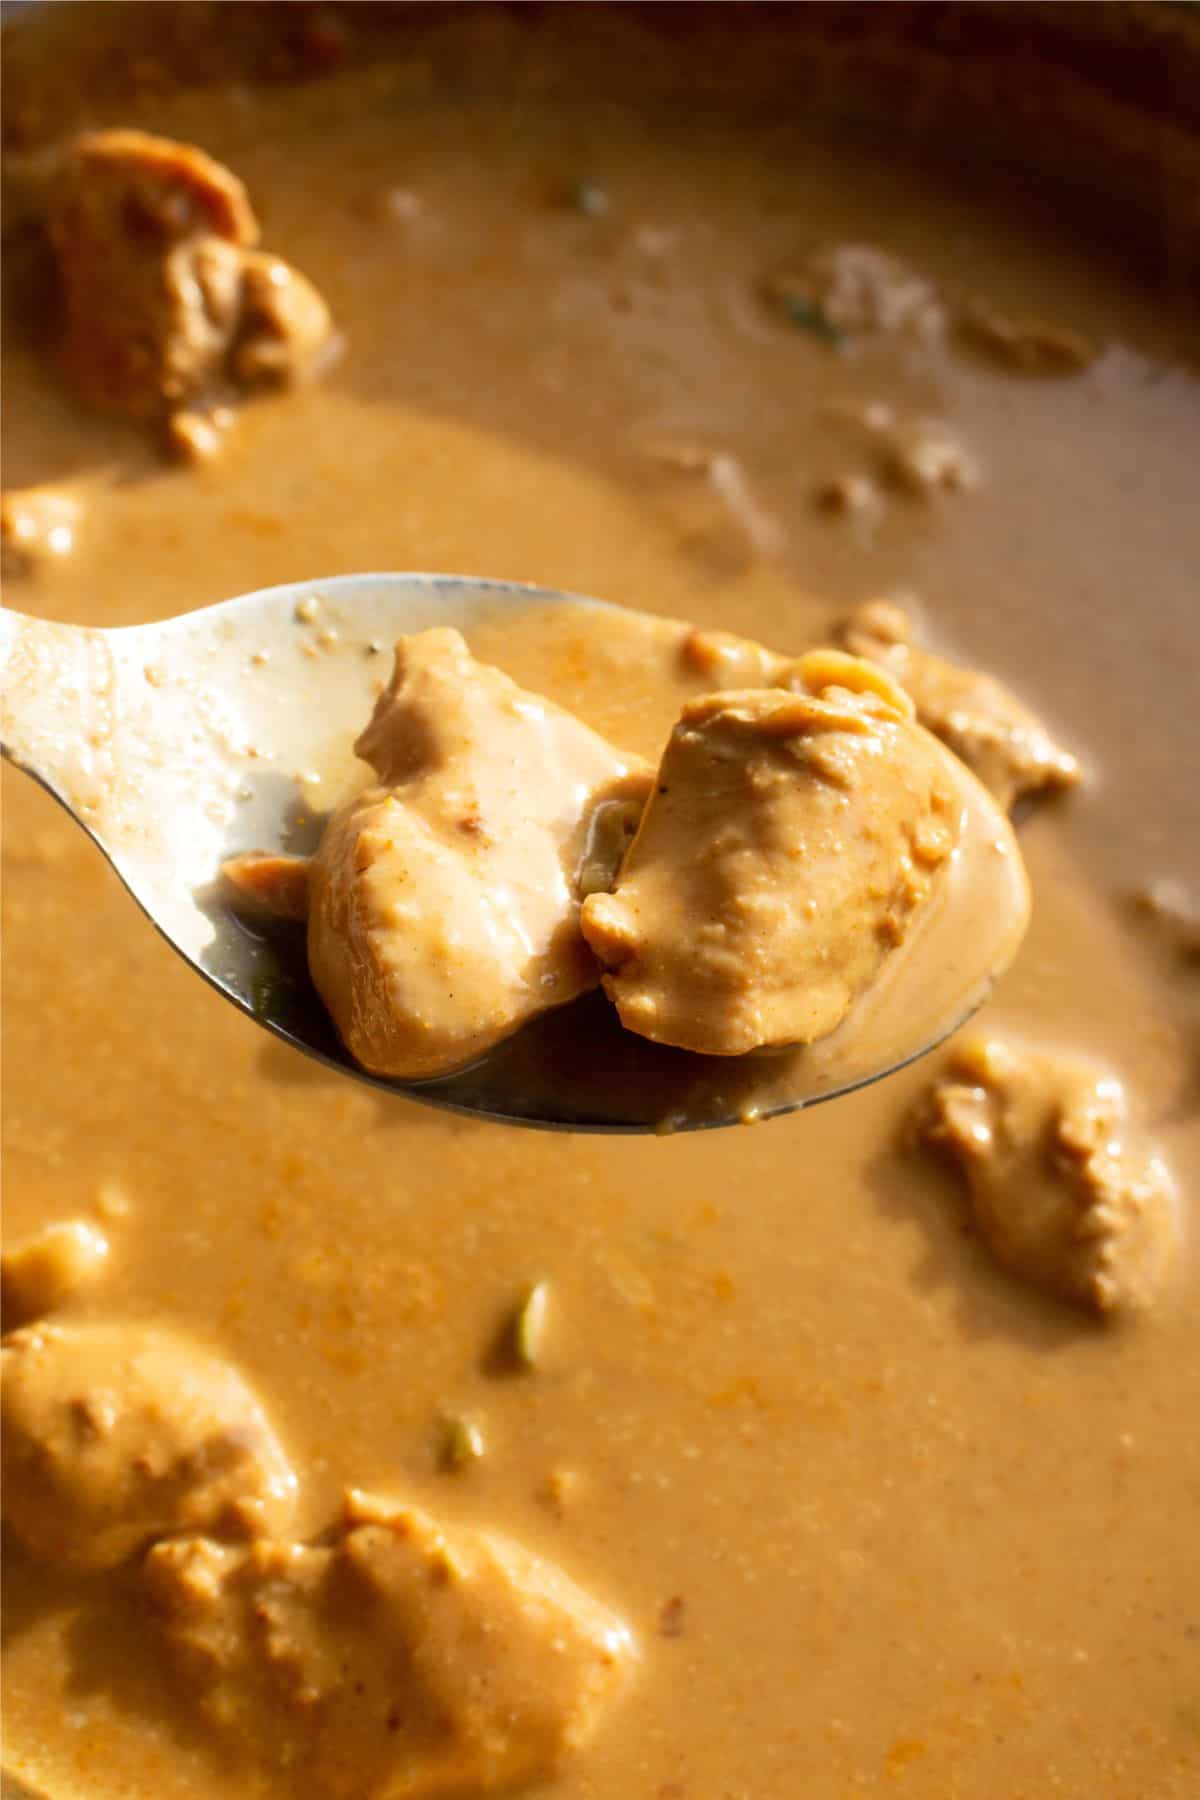 Close up of a spoonful of 2 pieces of satay chicken from the Peanut Butter Chicken Satay Curry pan.